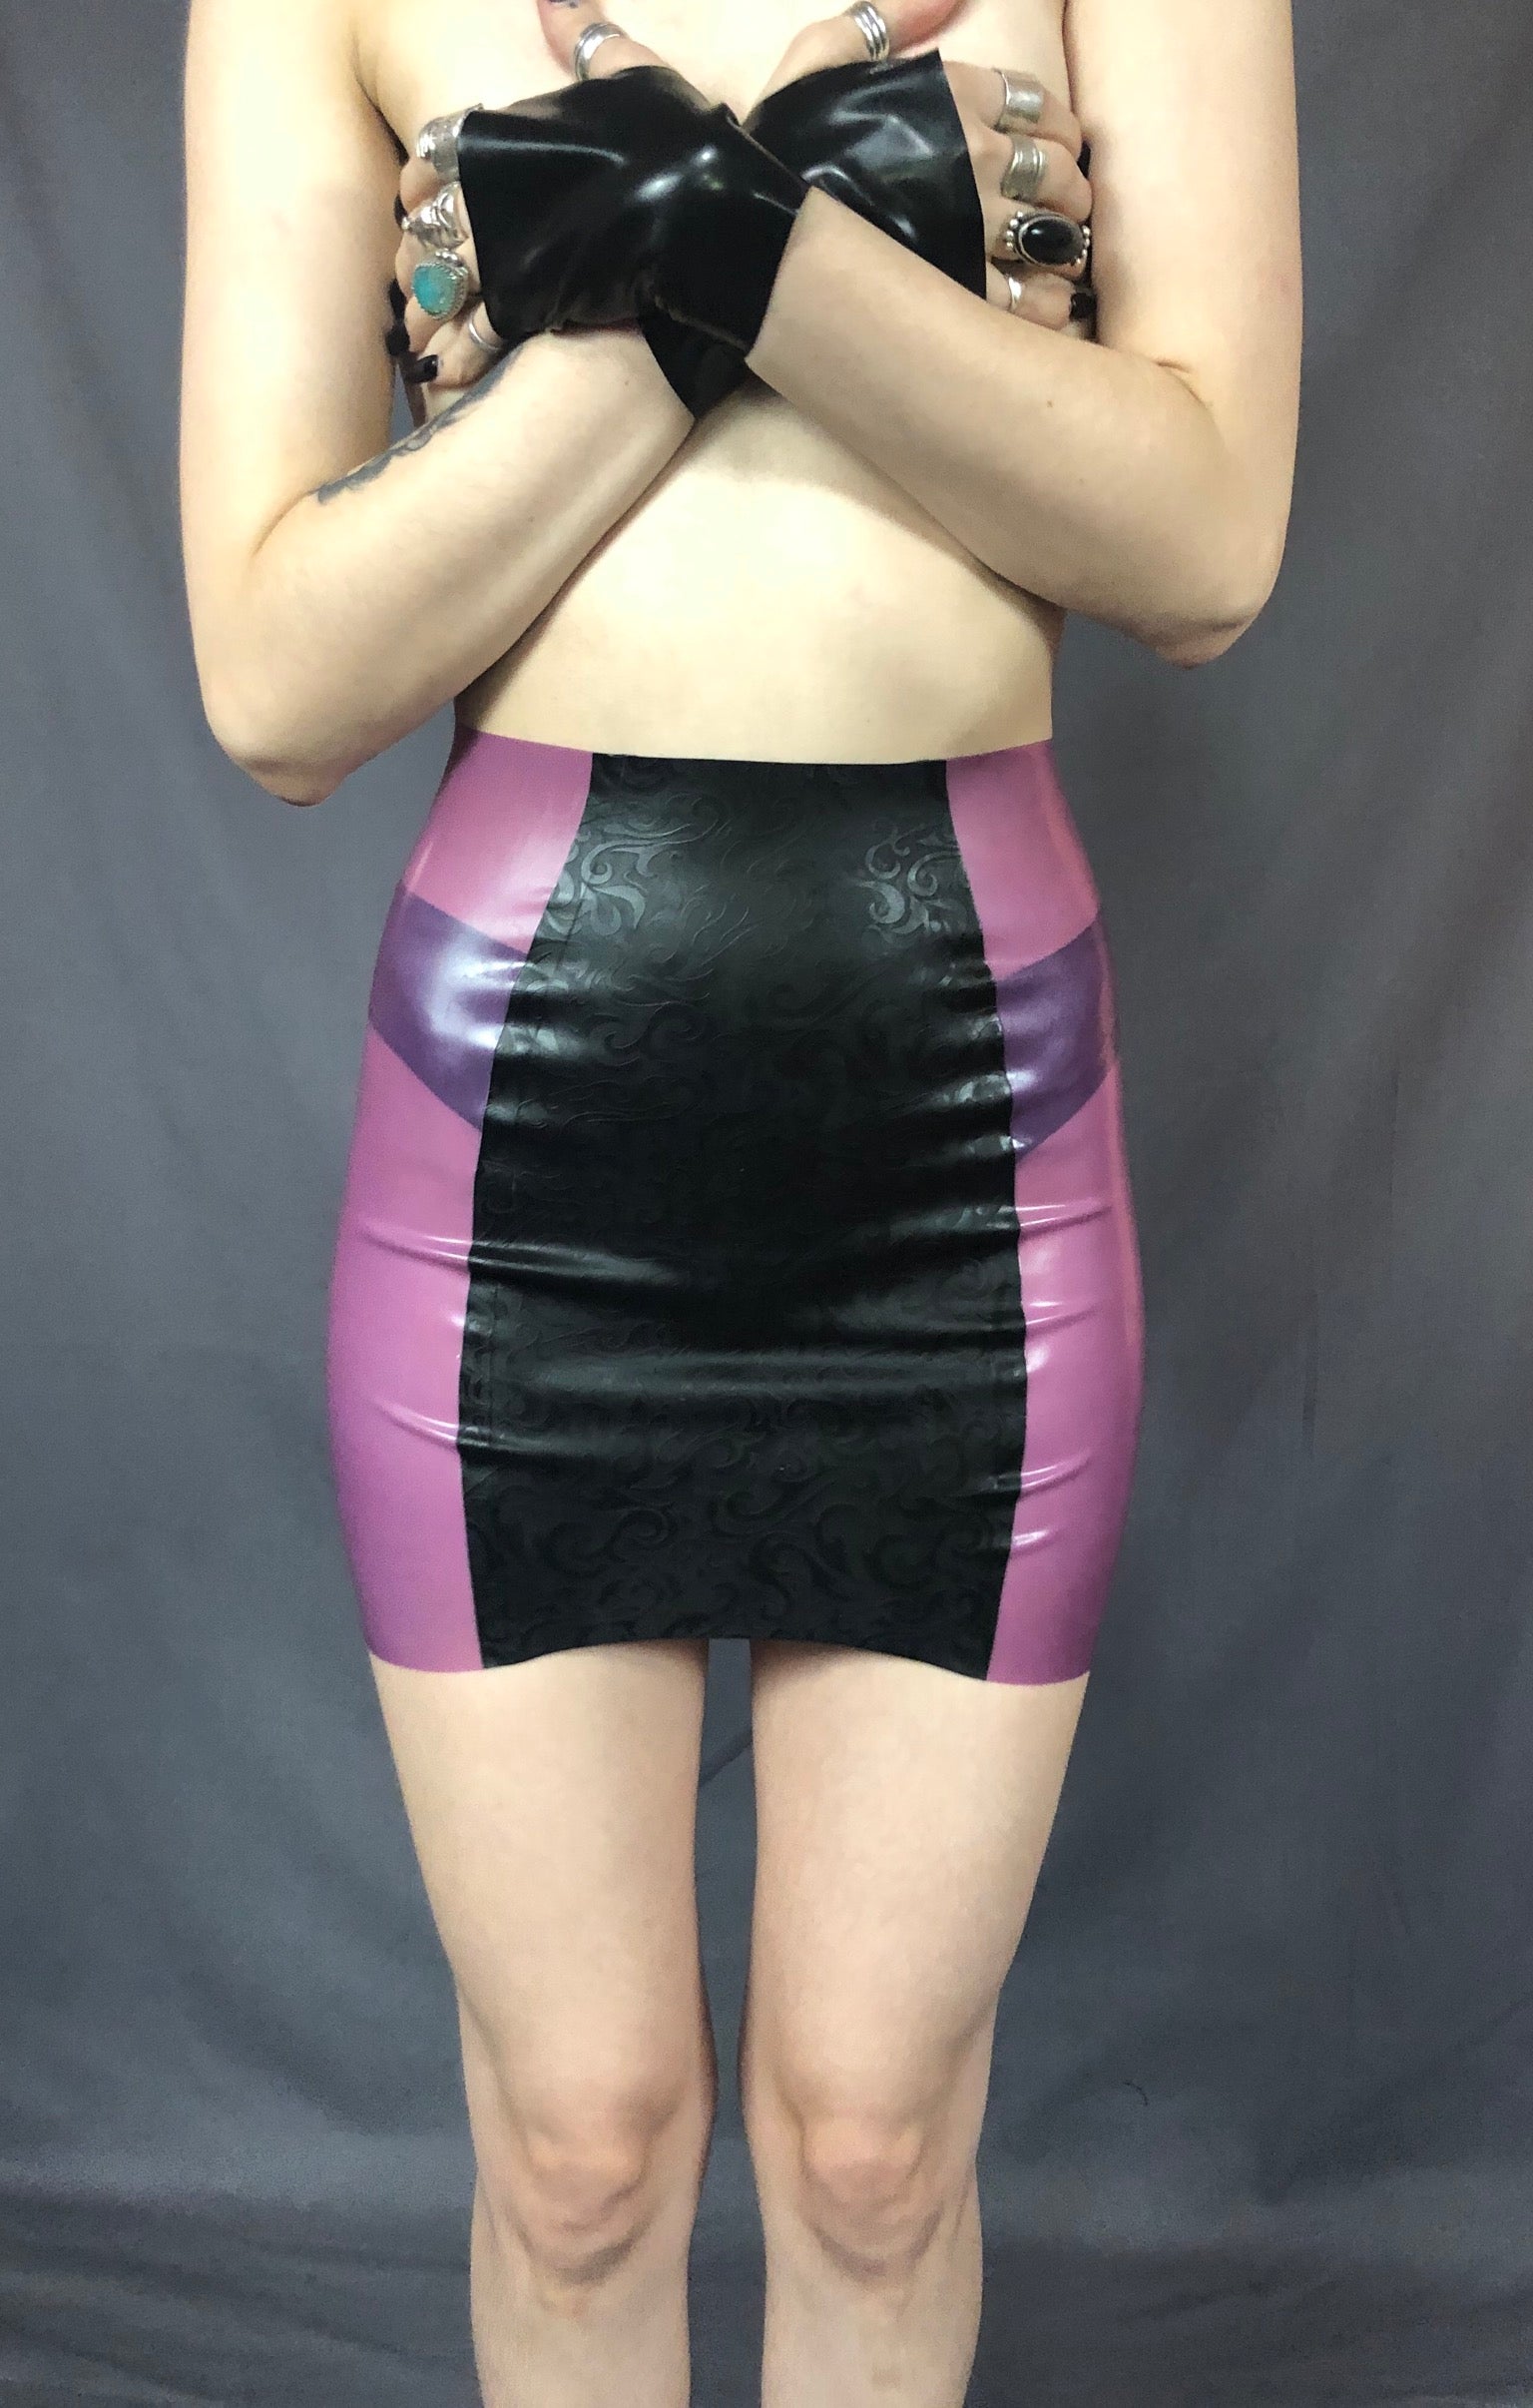 A feminine model holding black latex gloved hands over their breasts showing the front of the black and magenta Latex Girdle Mini Skirt.